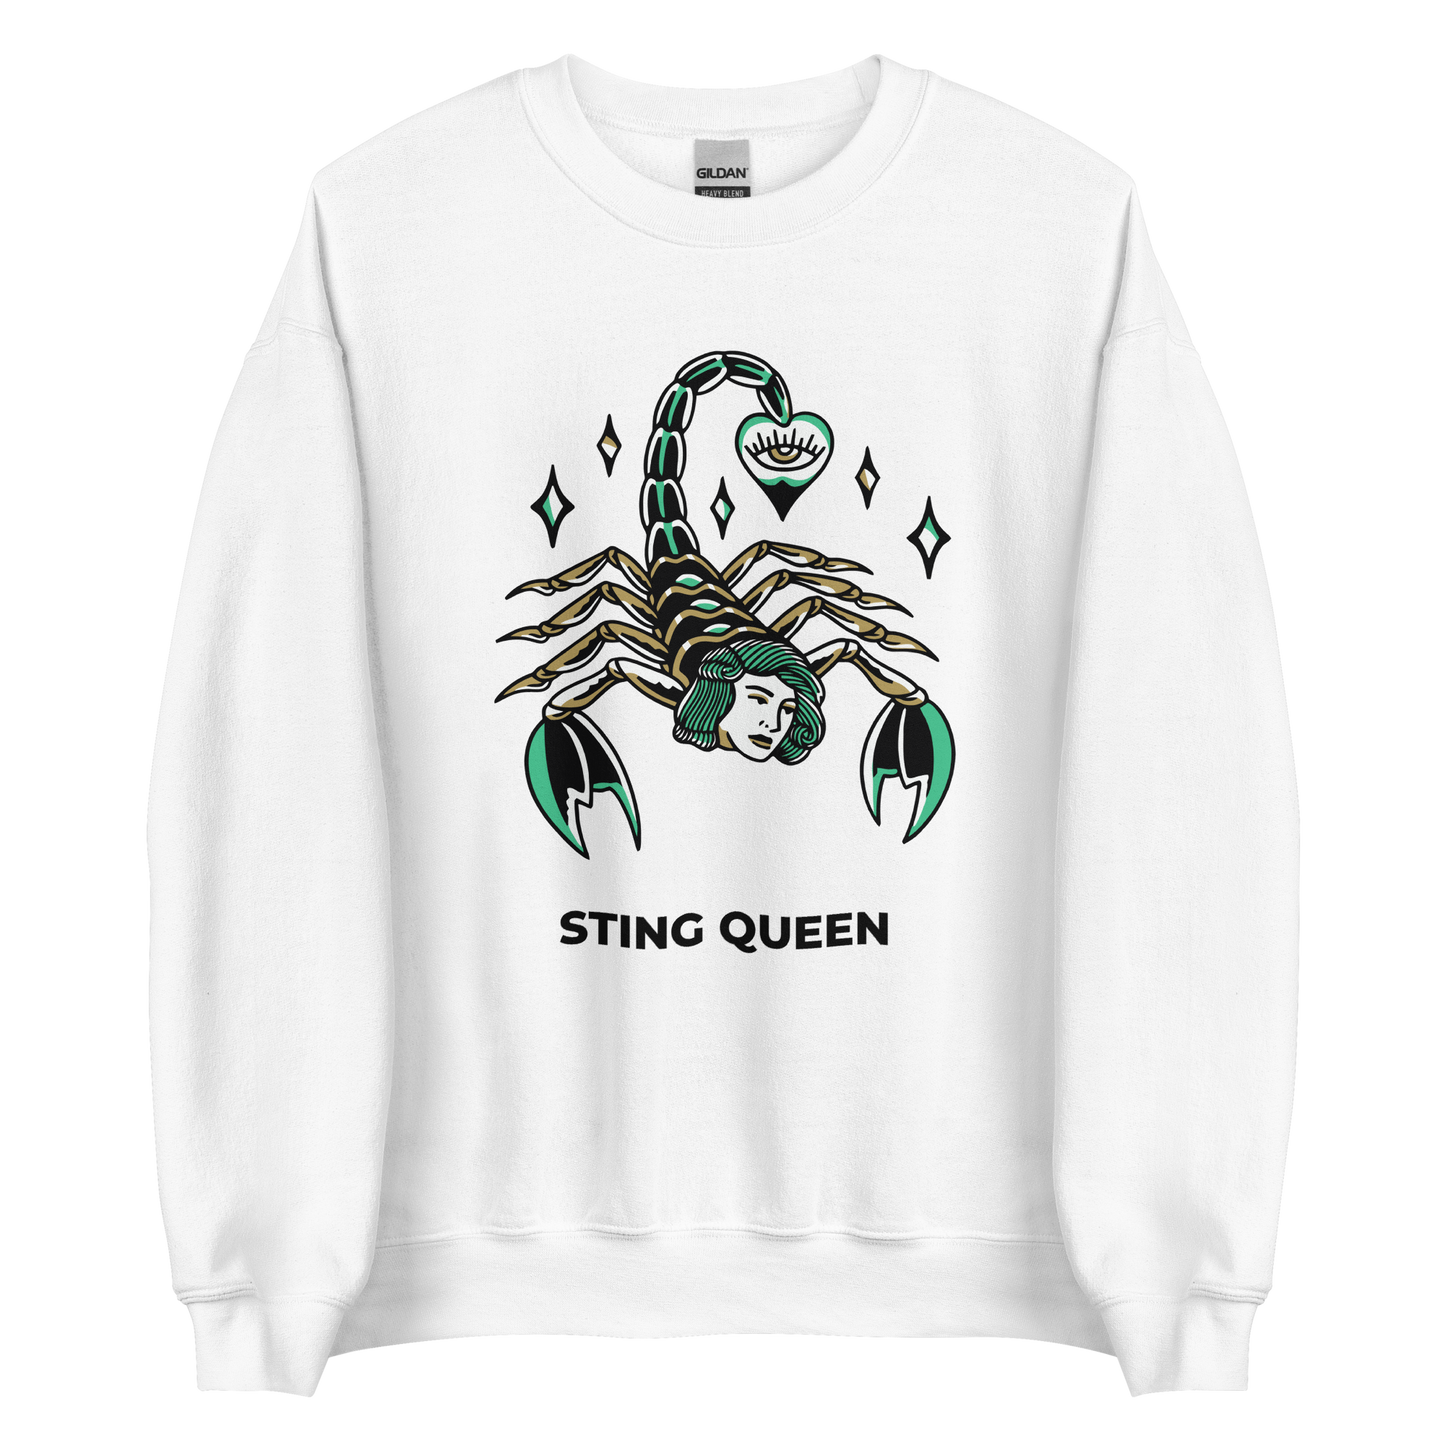 White Scorpion Sweatshirt featuring the Sting Queen graphic on the chest - Cool Graphic Scorpion Sweatshirts - Boozy Fox